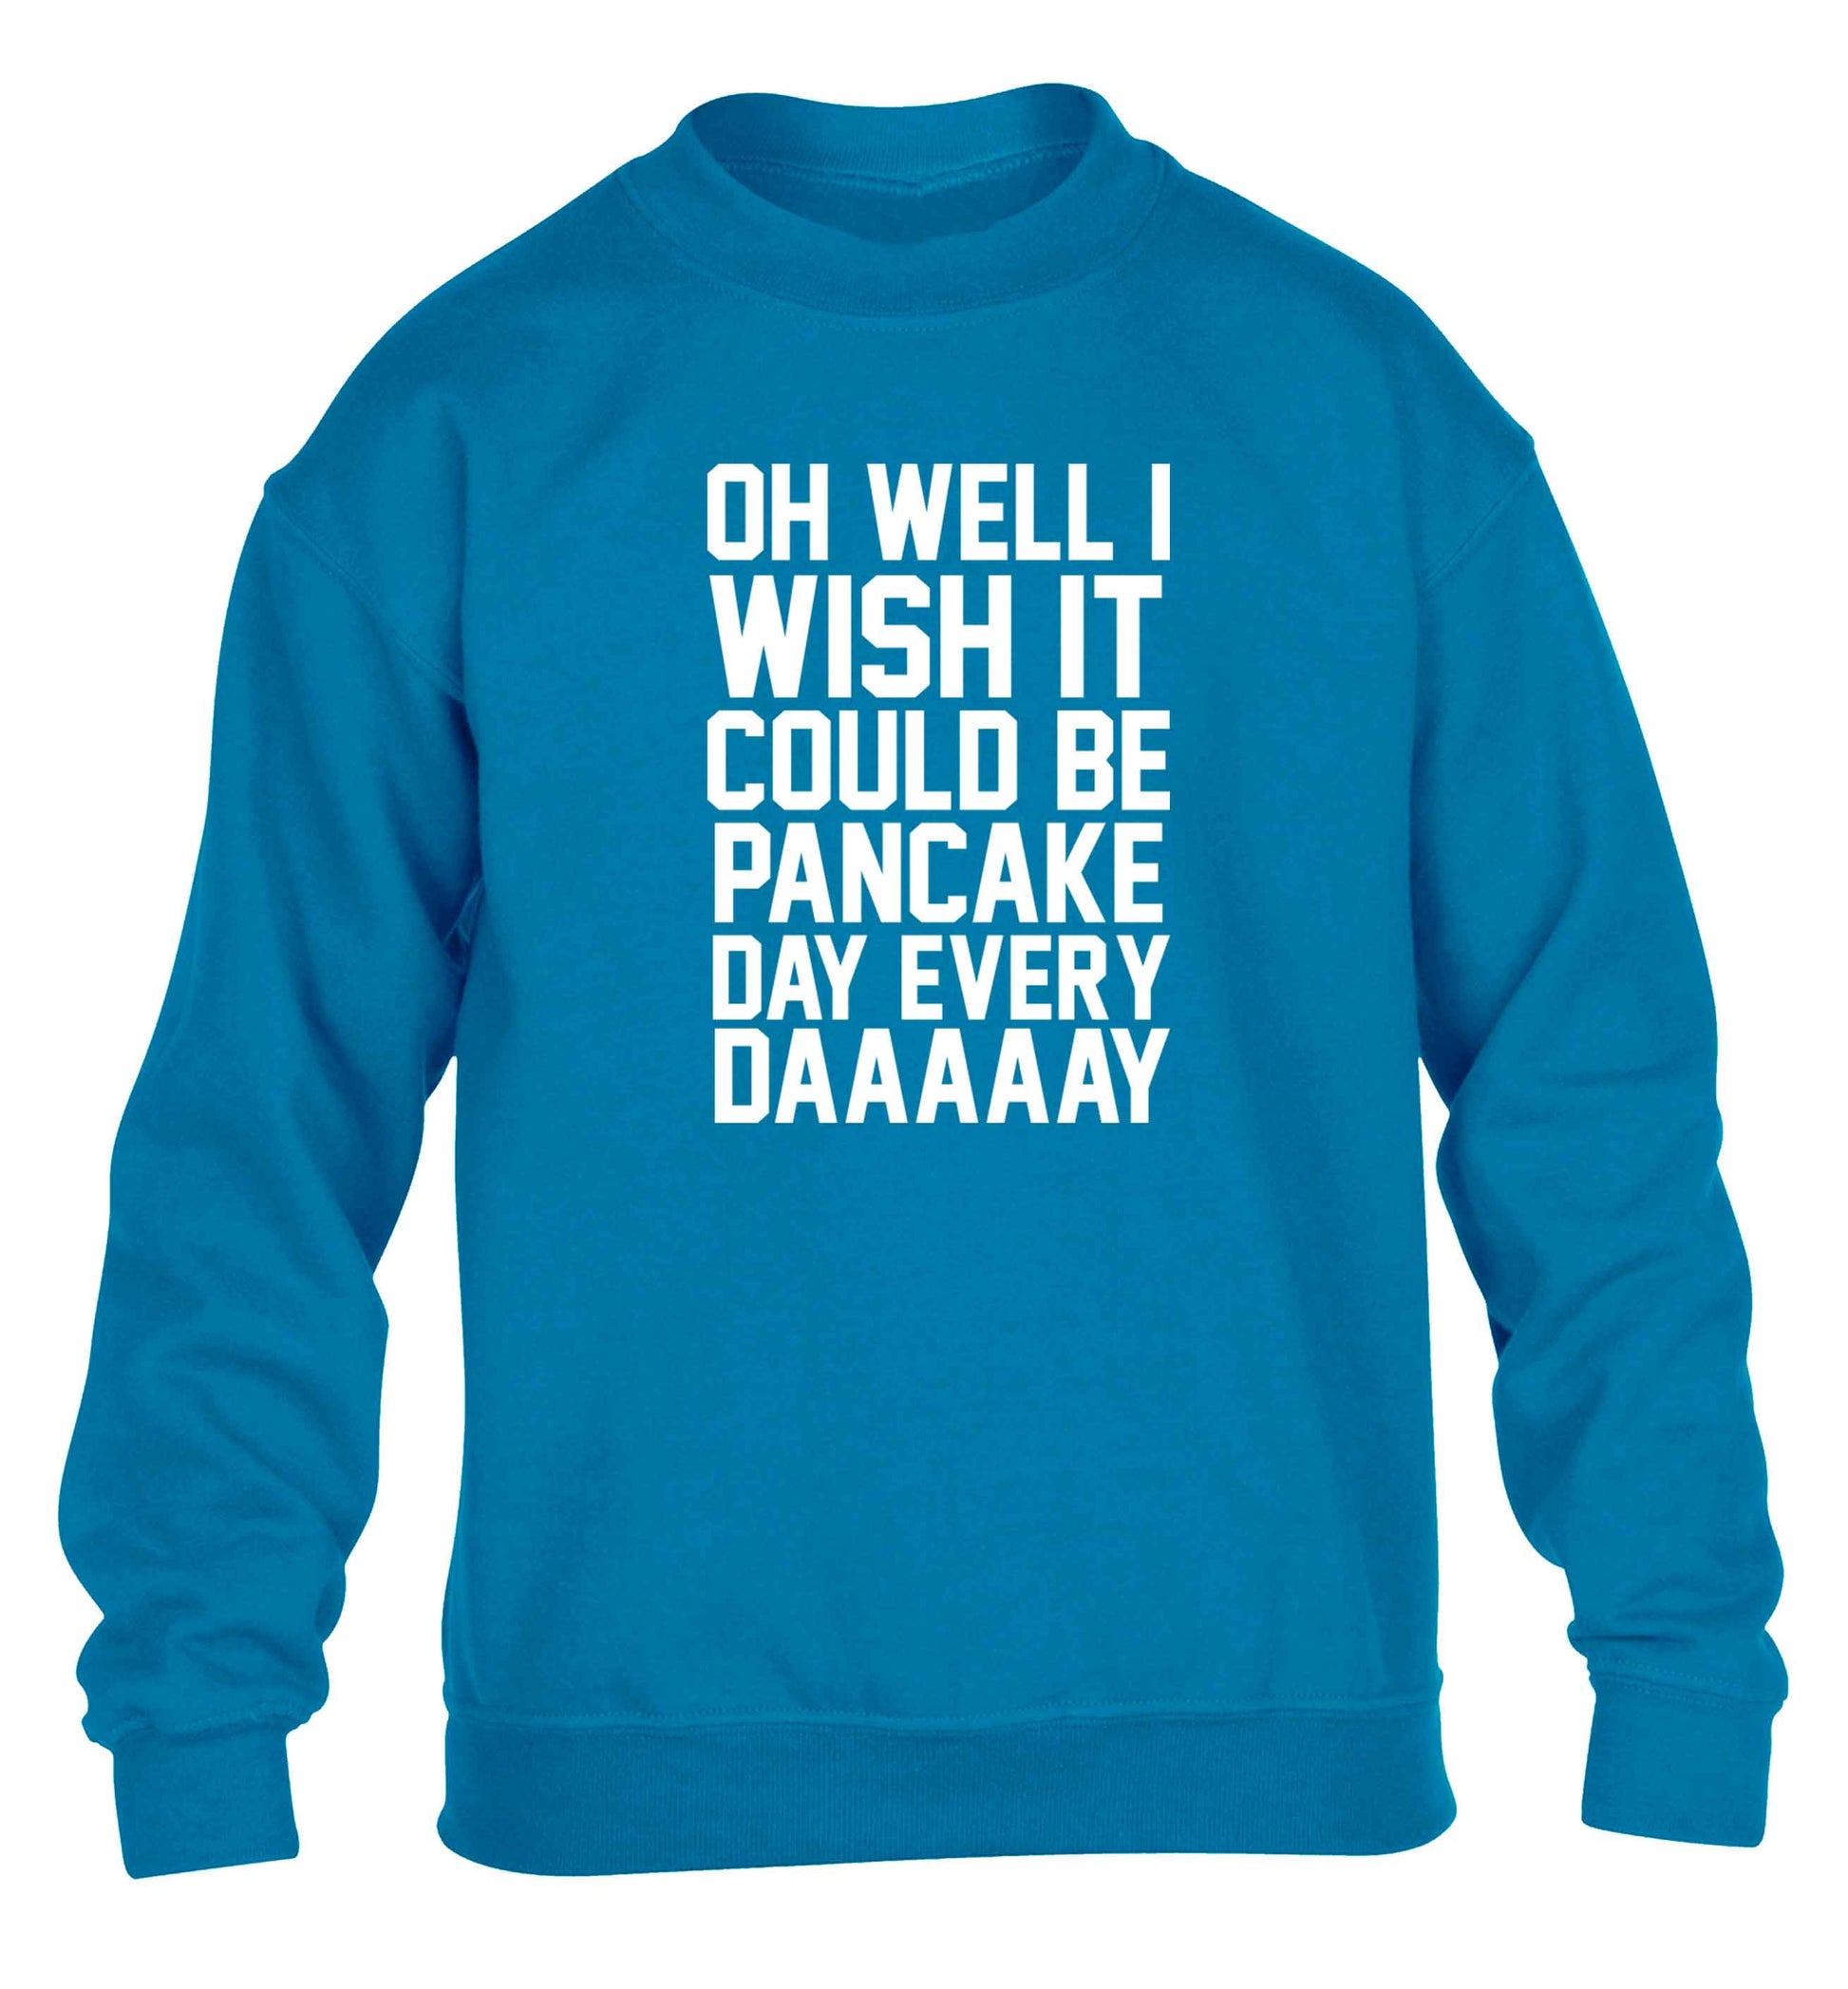 Oh well I wish it could be pancake day every day children's blue sweater 12-13 Years